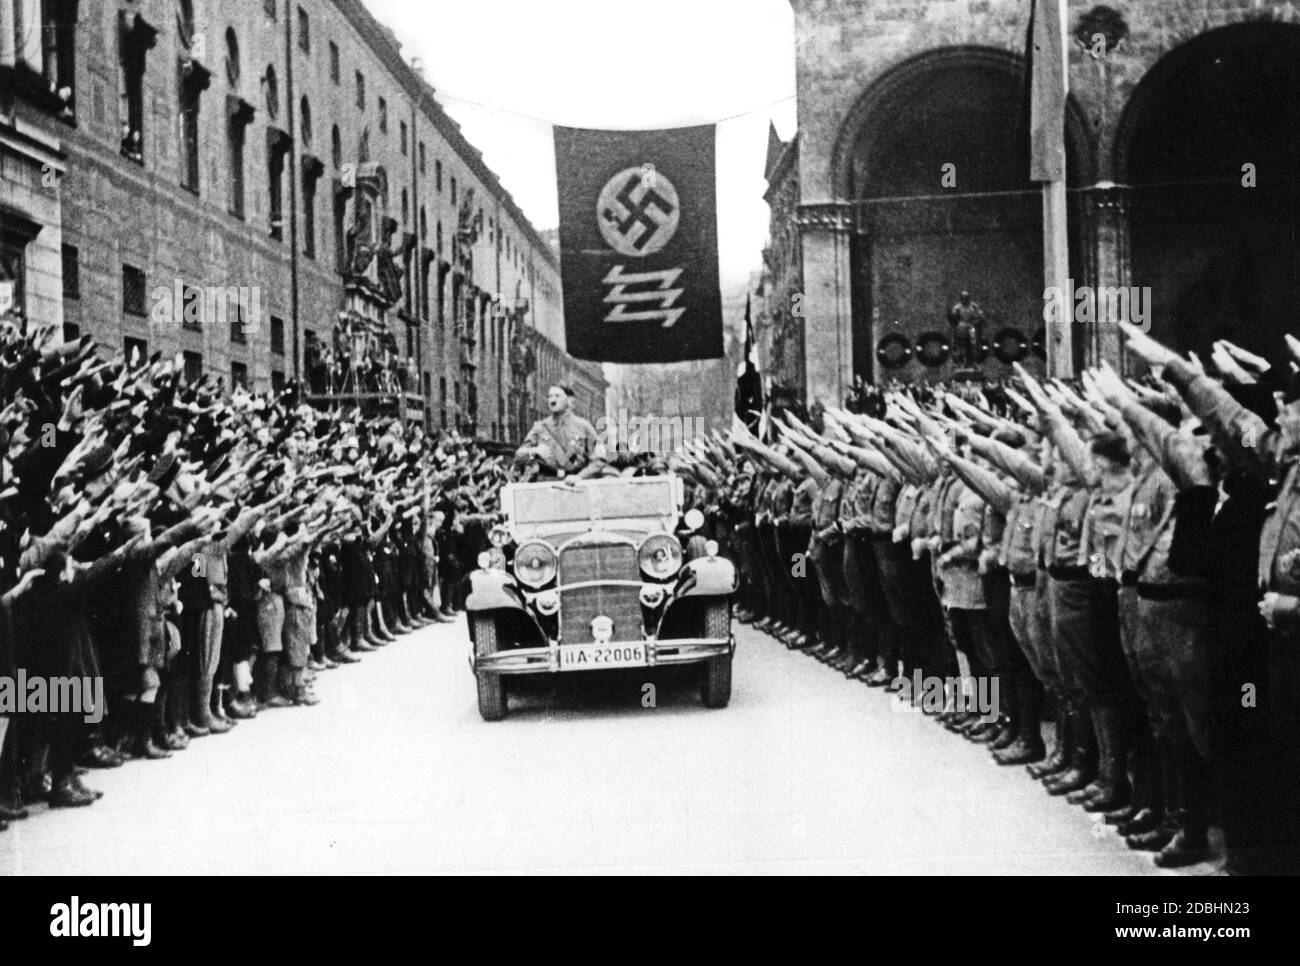 'Adolf Hitler and the NSDAP celebrate the achievement of their goals on November 9, 1933, 10 years after the failed coup. Hitler had become Reich Chancellor that year. At the place under the flag with swastika and Wolfsangel, which can be seen in the background, a commemorative plaque was placed in honor of the martyrs of November 9, 1923, which could only be passed by saluting with the Nazi salute. From then on, the 9th of November became a National Socialist holiday, as part of which the traditional march took place from the Buergerbraeukeller at the Wiener Platz across the Ludwigsbruecke Stock Photo